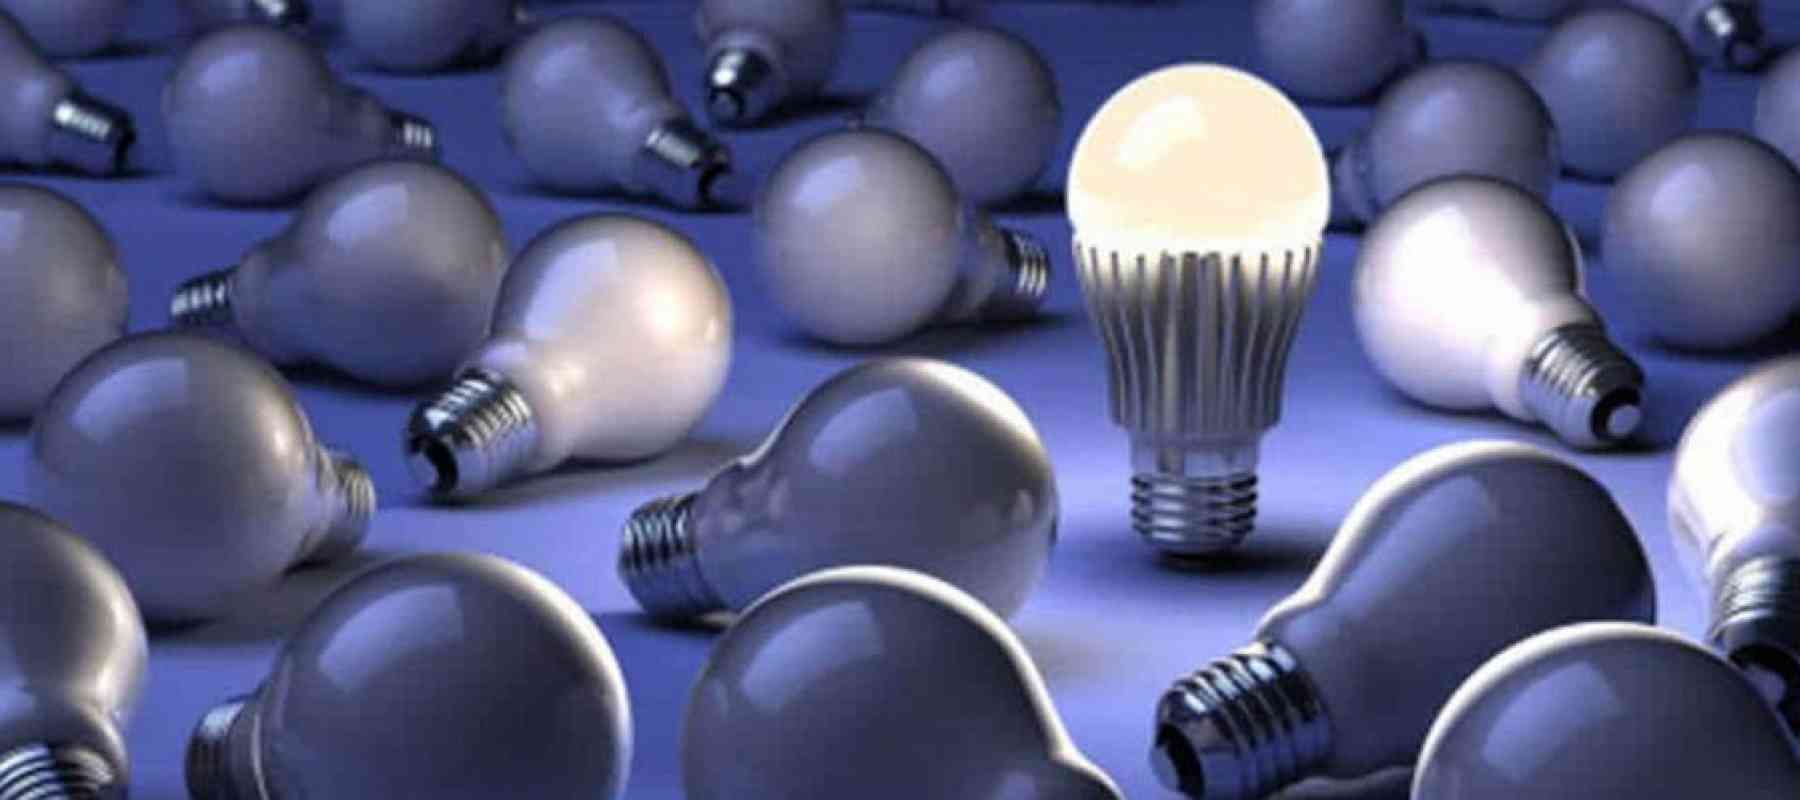 LED, Lighting the Way in Consumer Energy Products